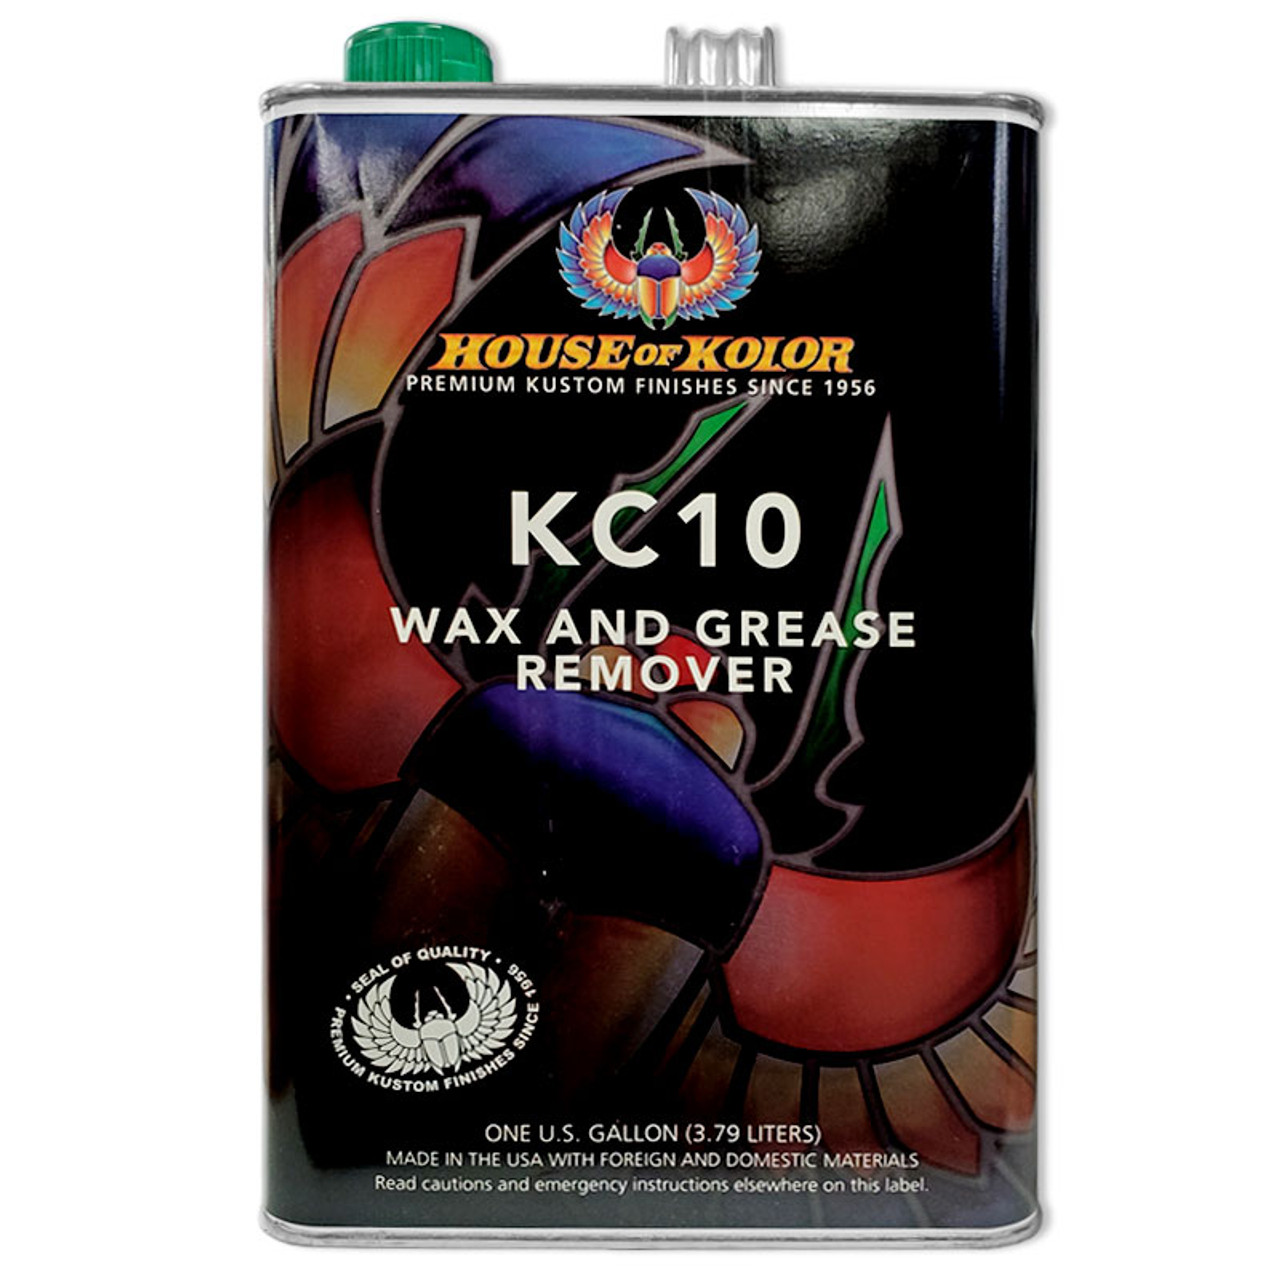 Wax and Grease Remover